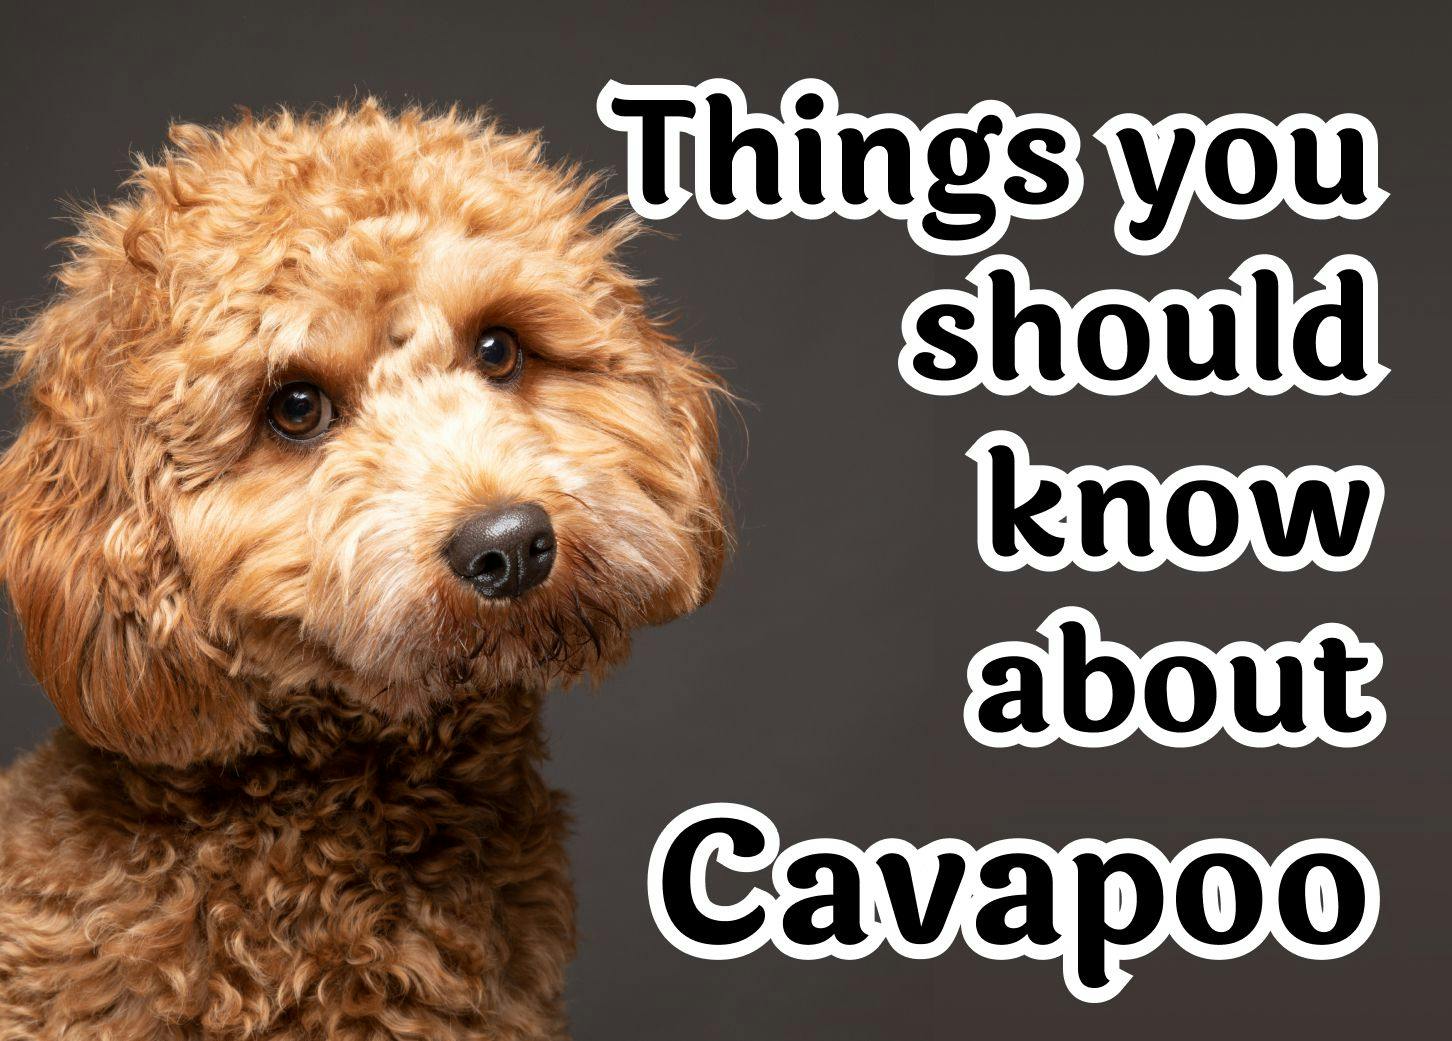 Common Questions About the Cavapoo Dog Breed